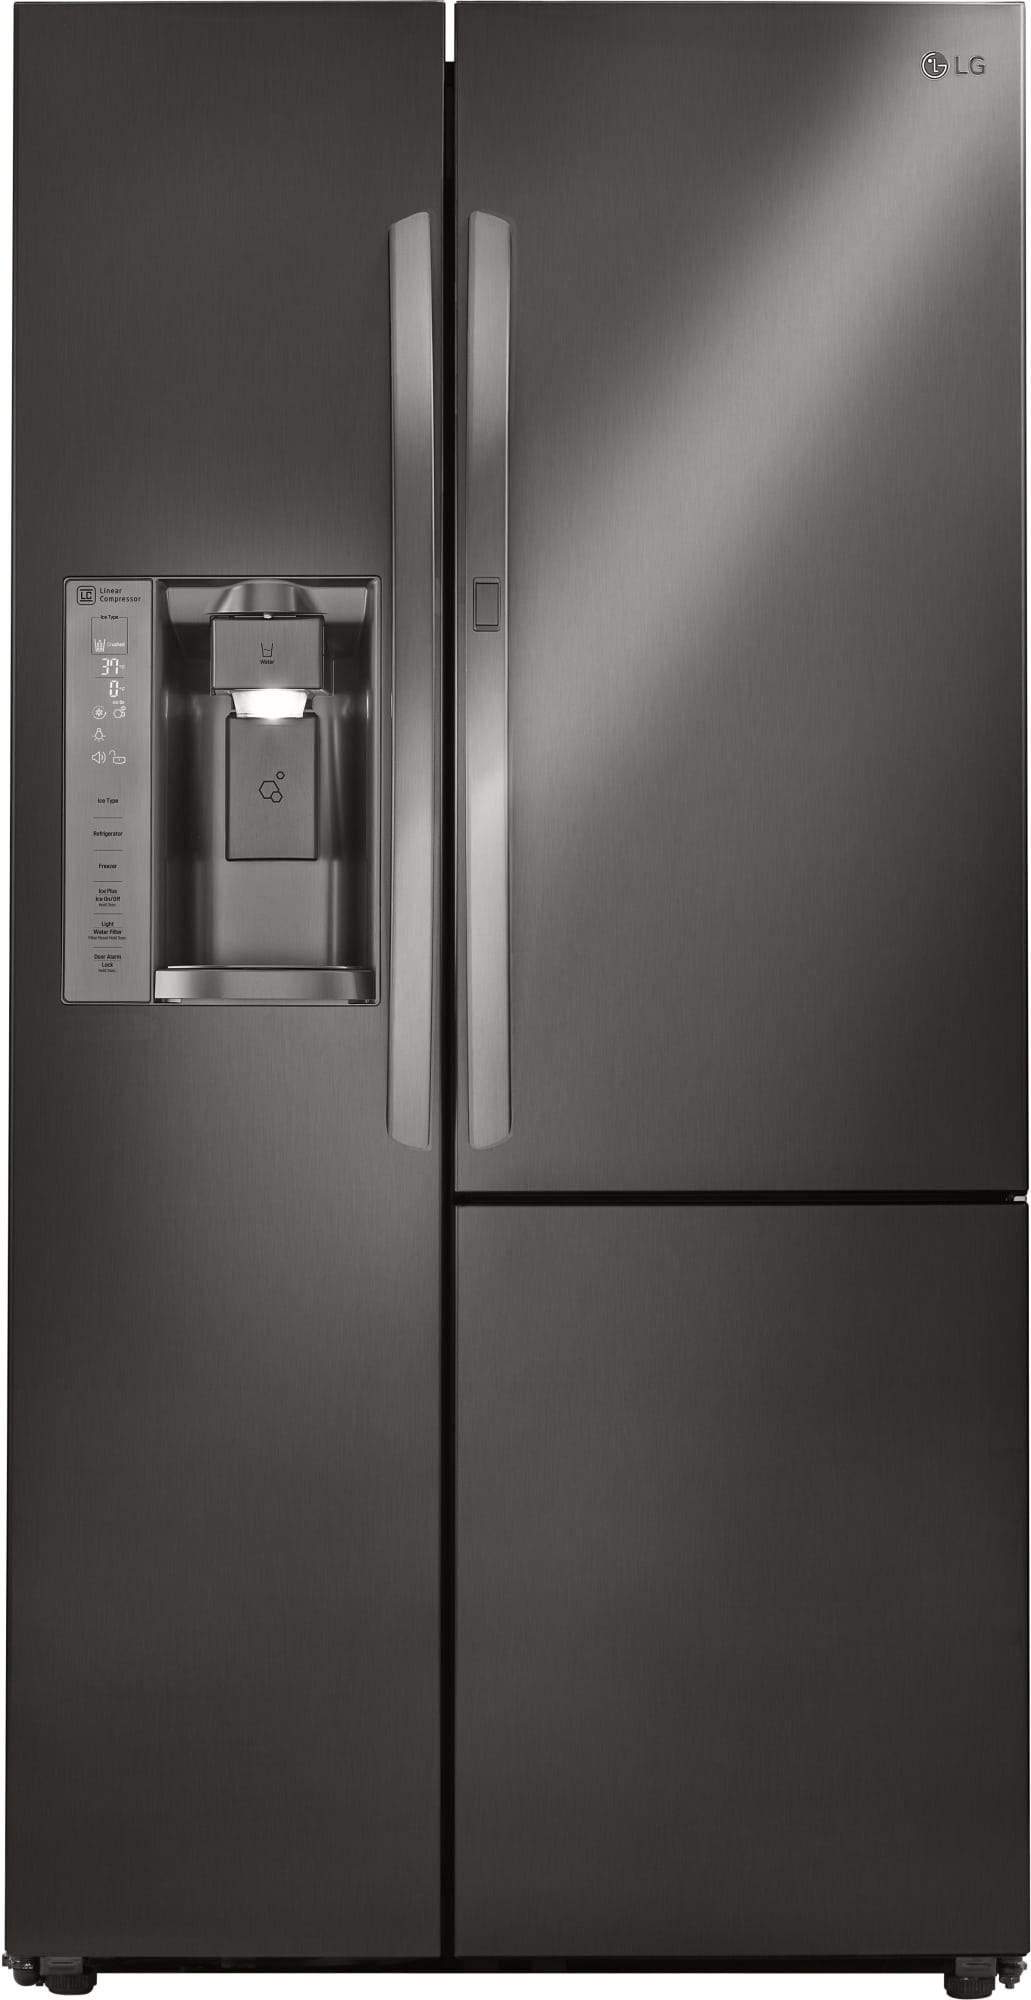 LG LSXC22386D 36 Inch Side-by-Side Refrigerator with Door-in-DoorÂ®, ColdSaver Panel